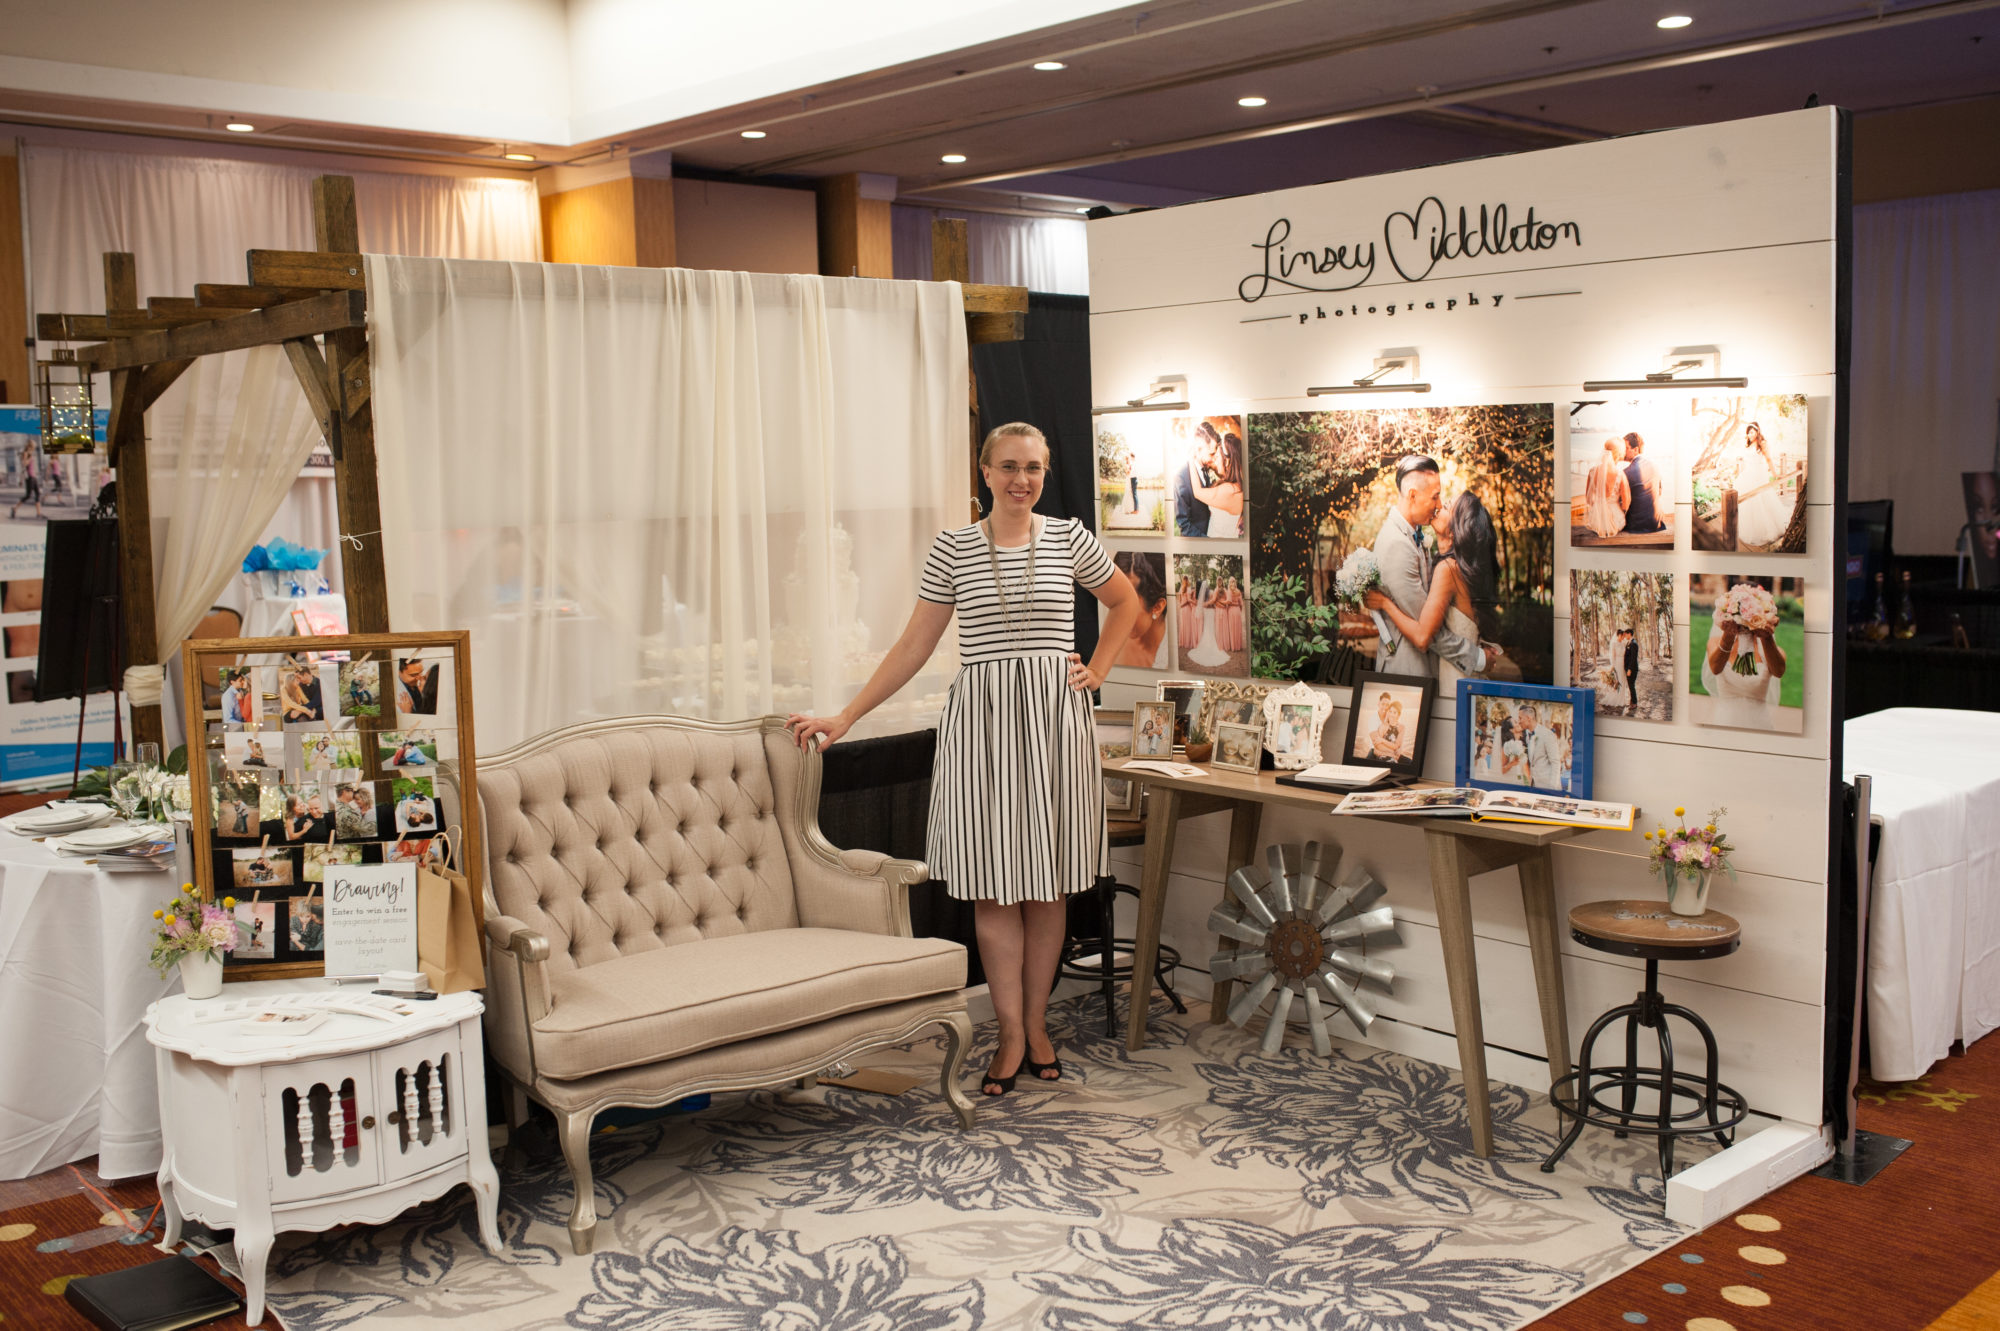 Bakersfield Bridal Expo | The Ultimate Bridal Event